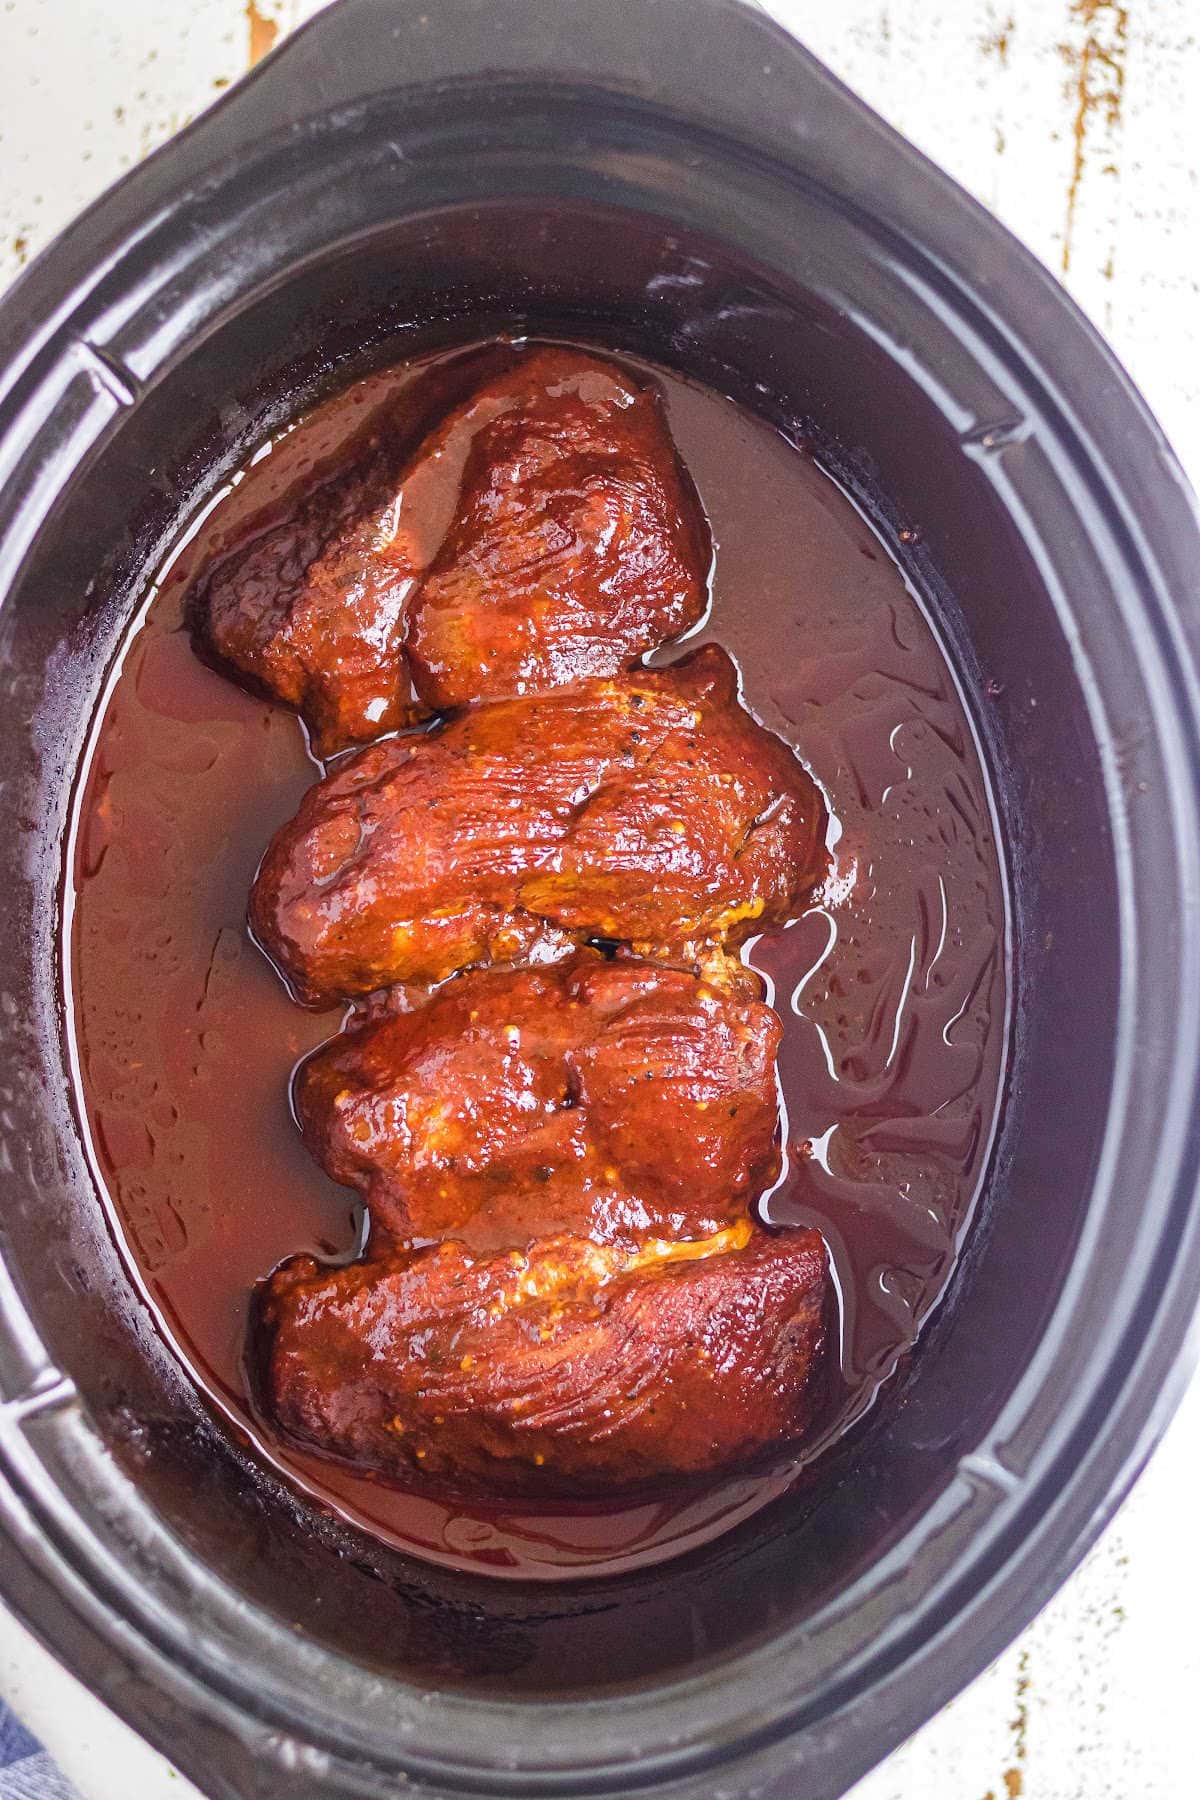 Overhead view of pork ribs in a tangy sauce in the slow cooker.